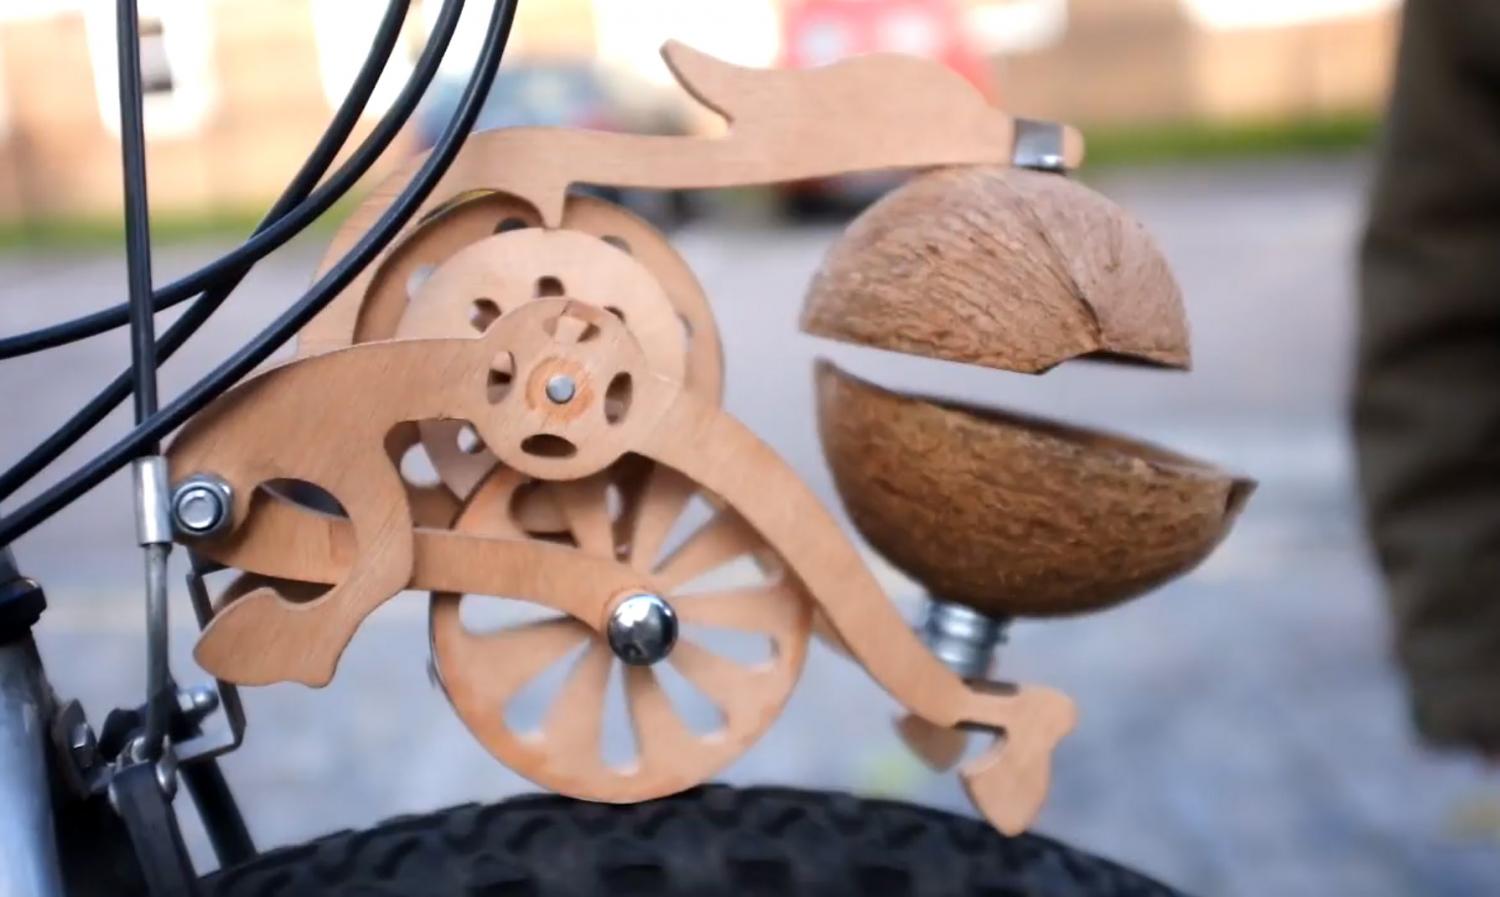 Trotify galloping horse bicycle accessory with coconuts - Monty Python bike gadget